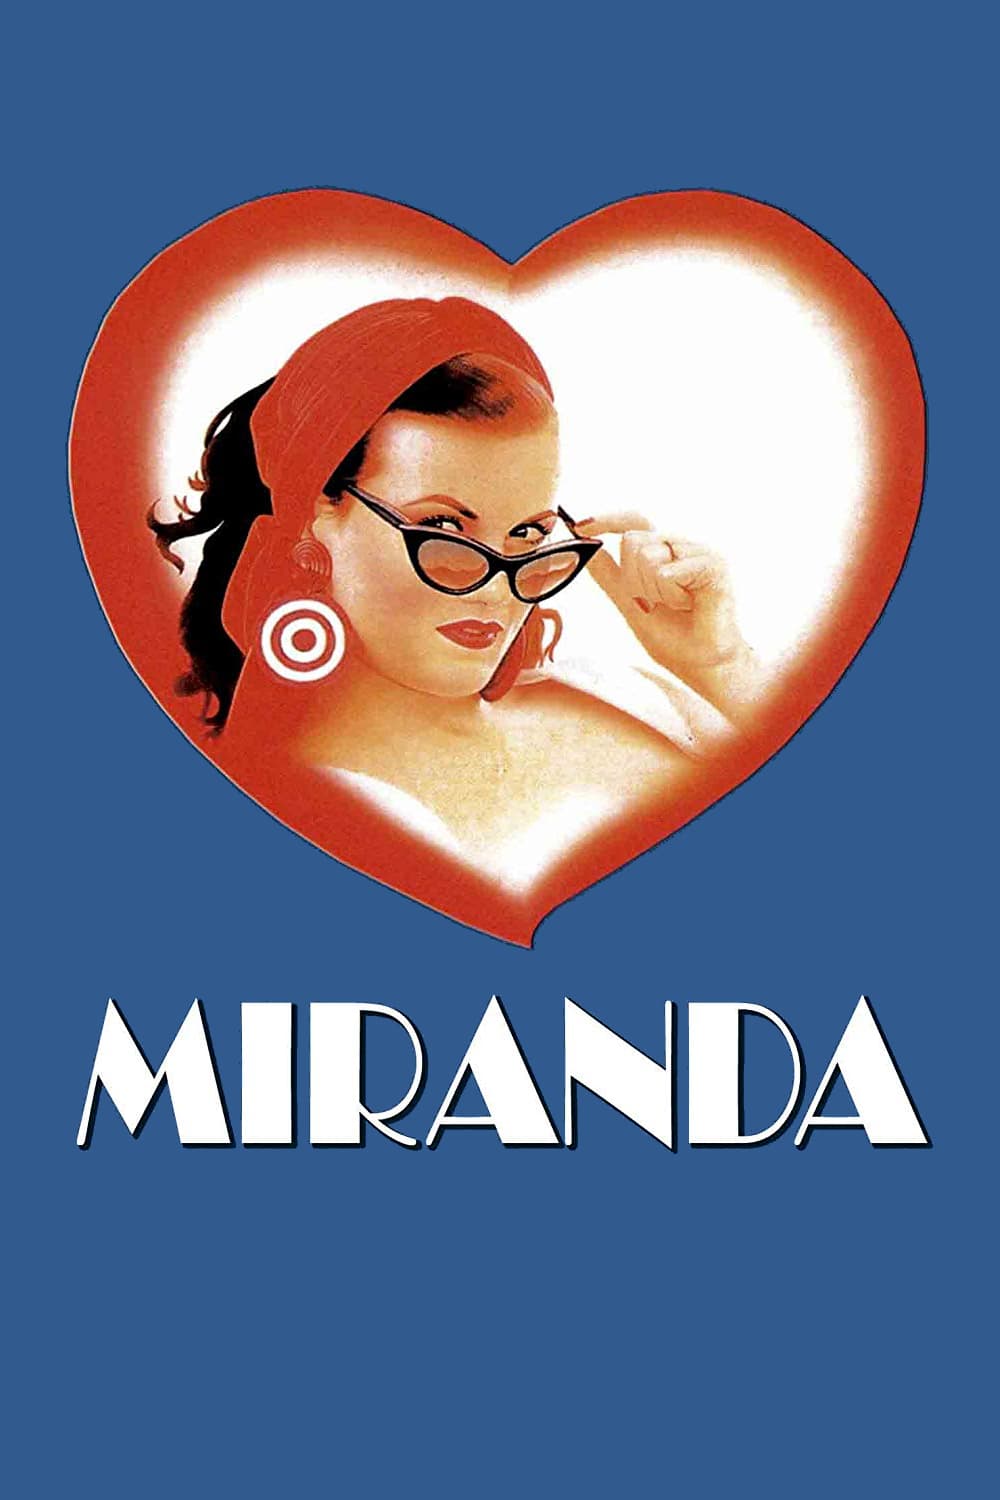 assad mohammed recommends miranda movie watch online pic